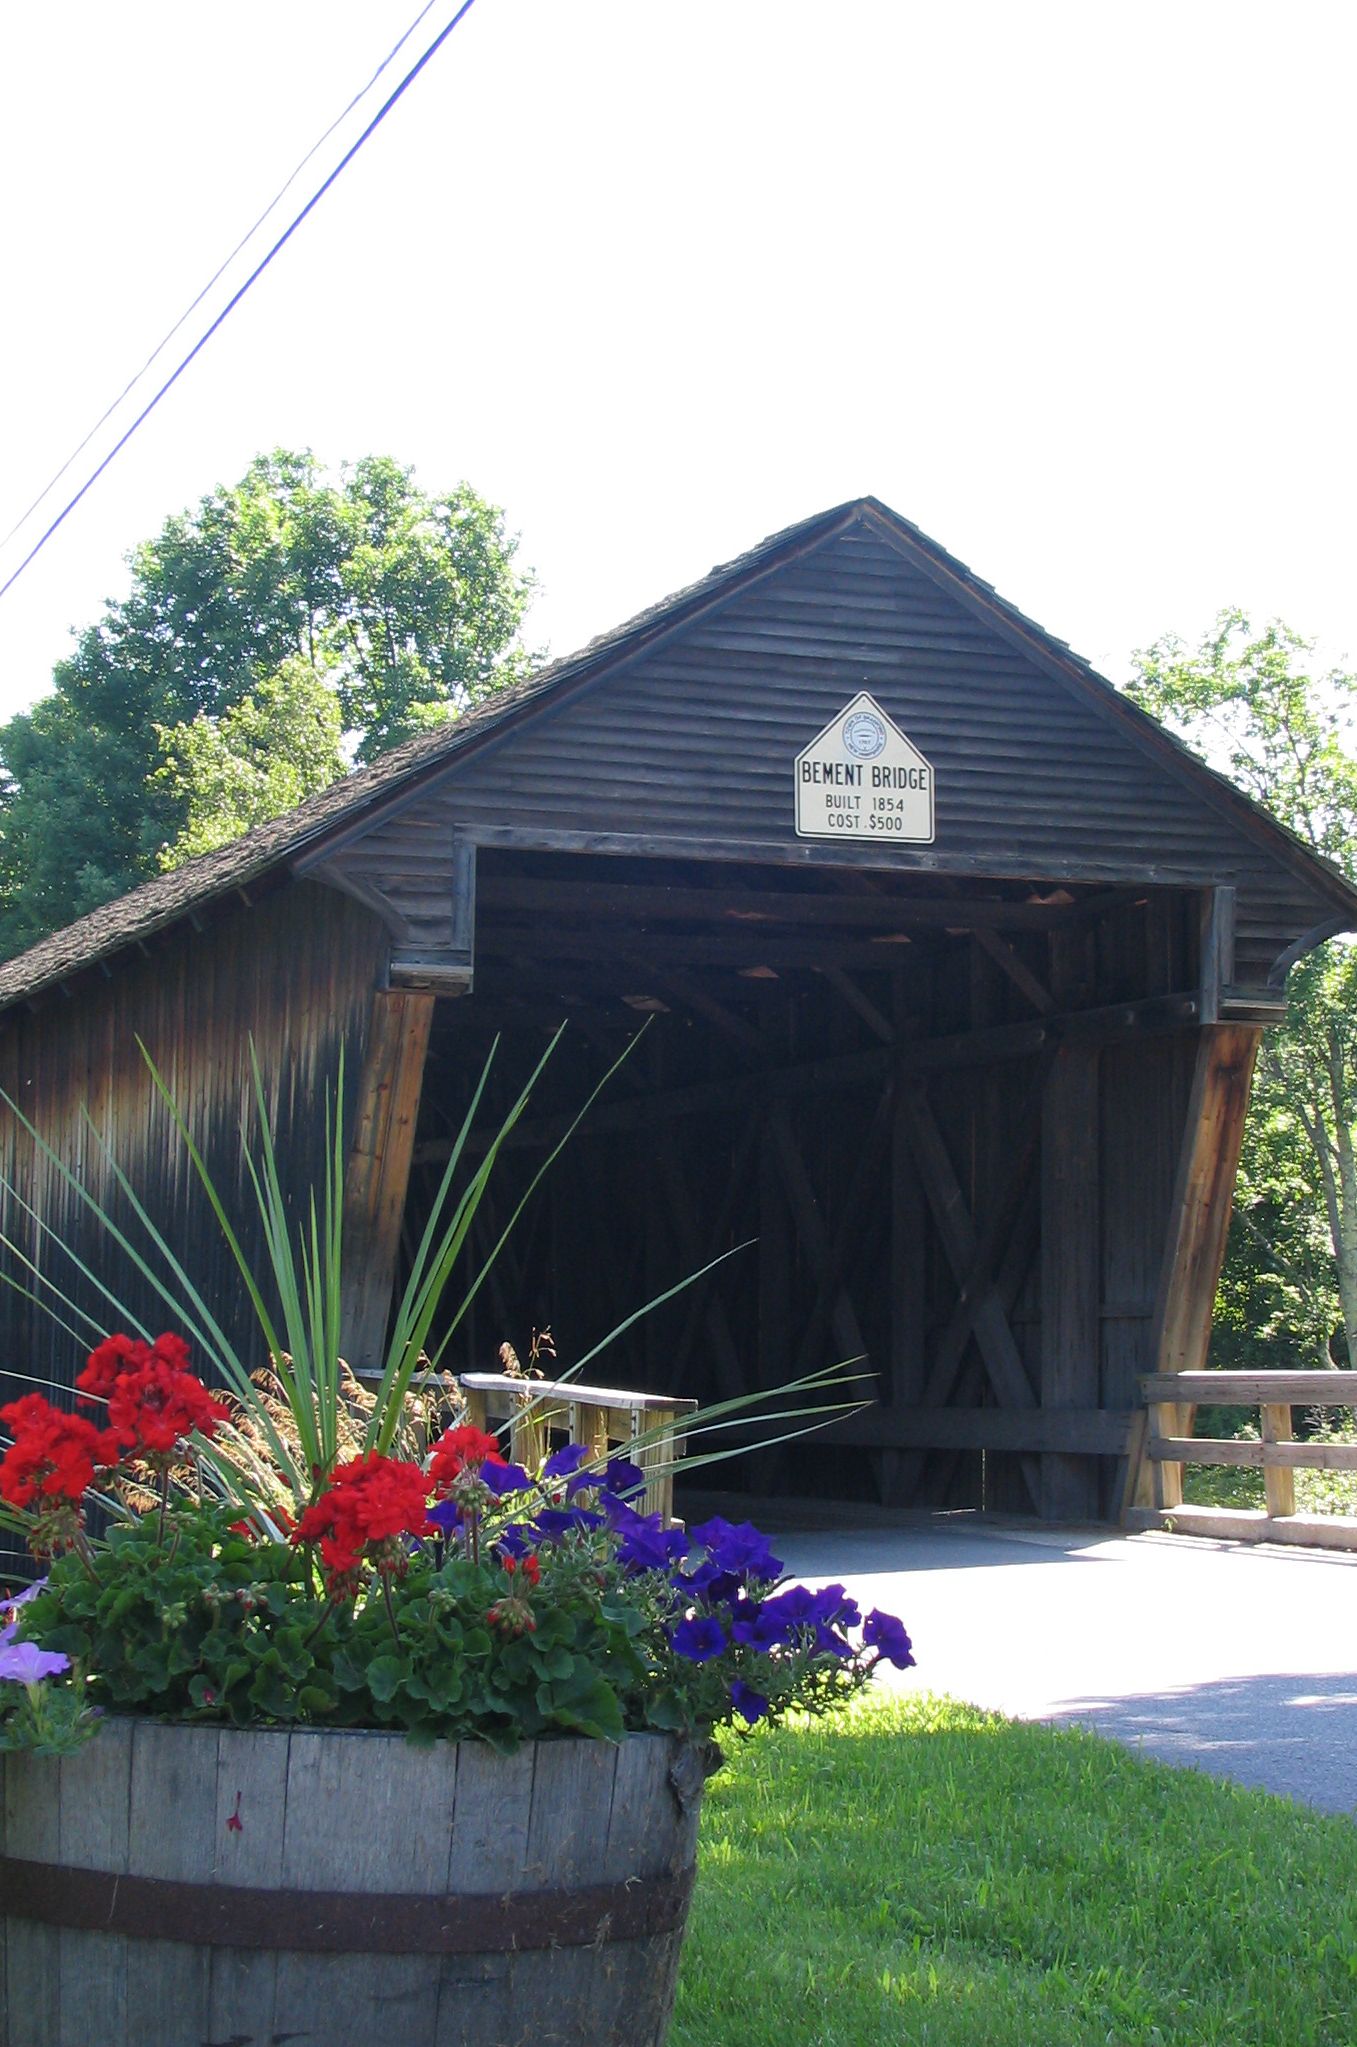 Covered Bridge in Summer (user submitted)